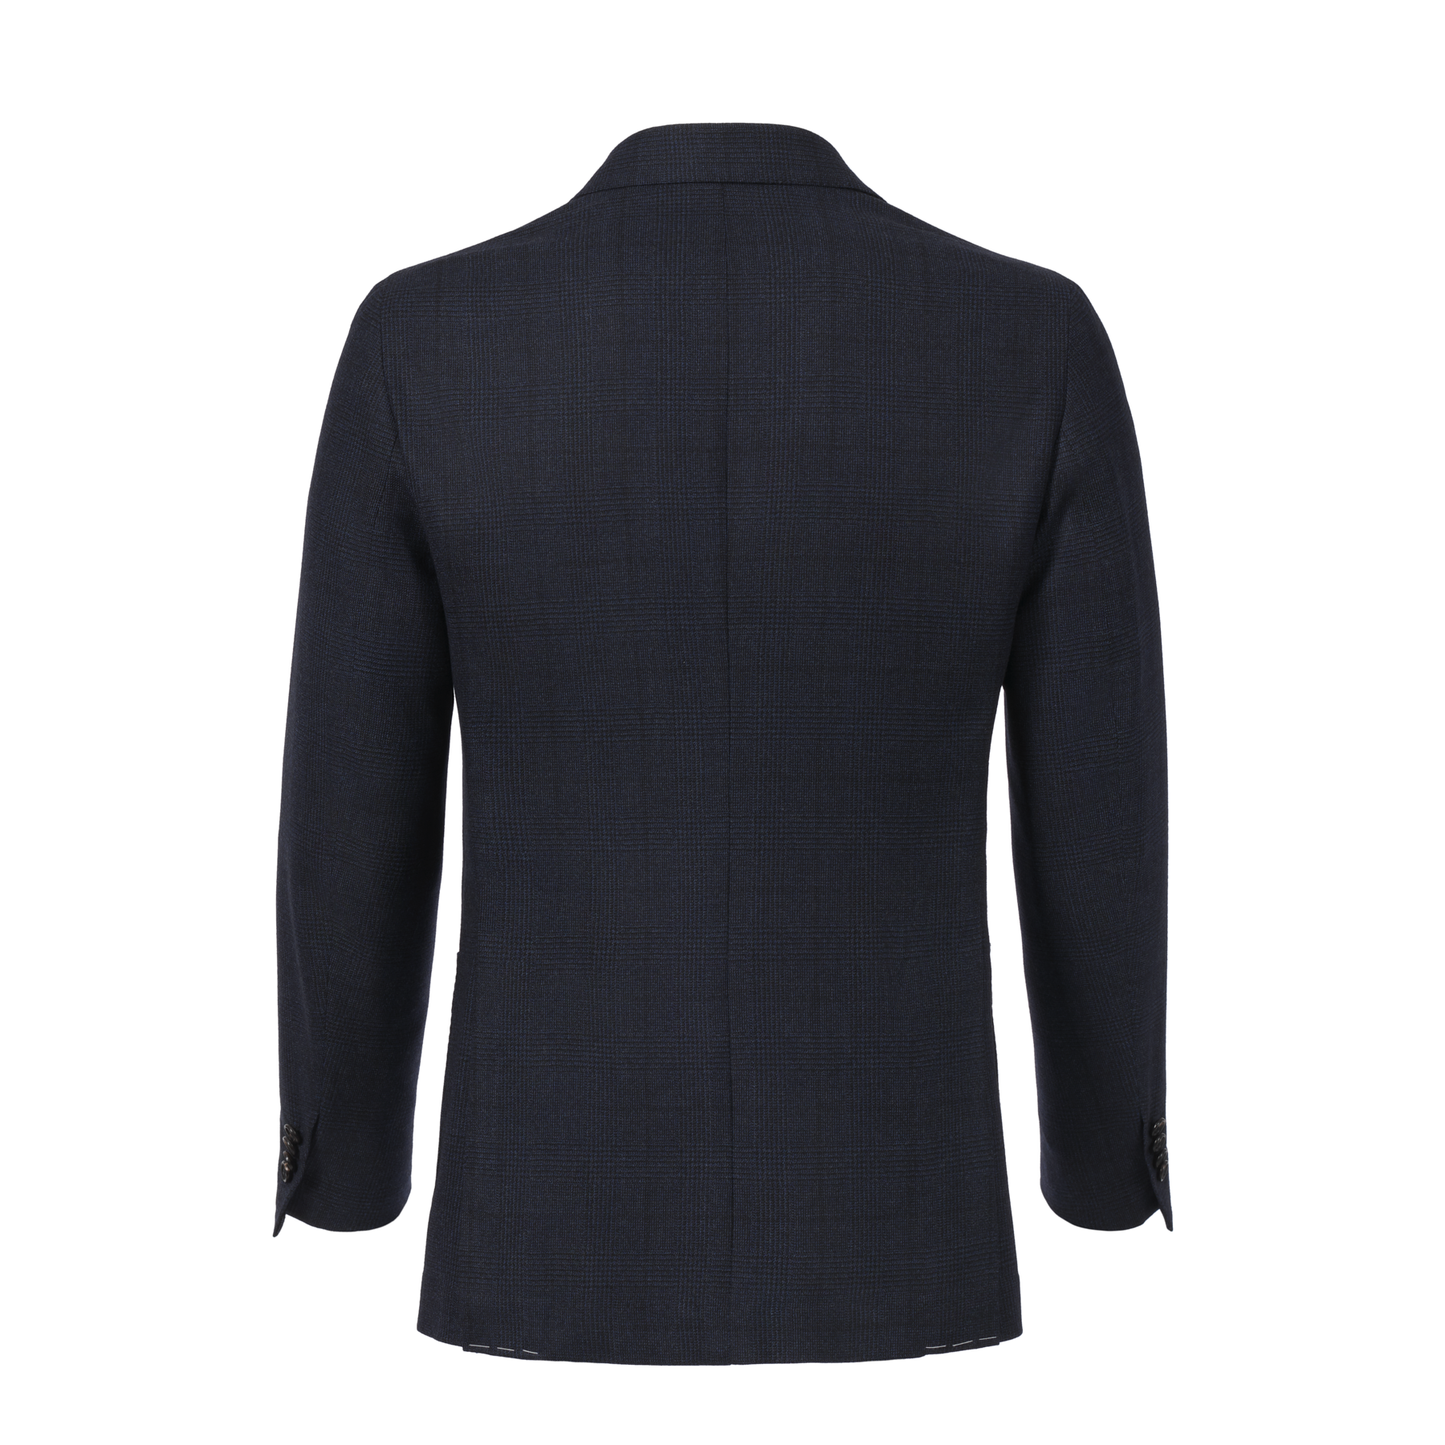 De Petrillo Single-Breasted Prince of Wales Wool Jacket in Dark Blue. Exclusively Made for Sartale - SARTALE